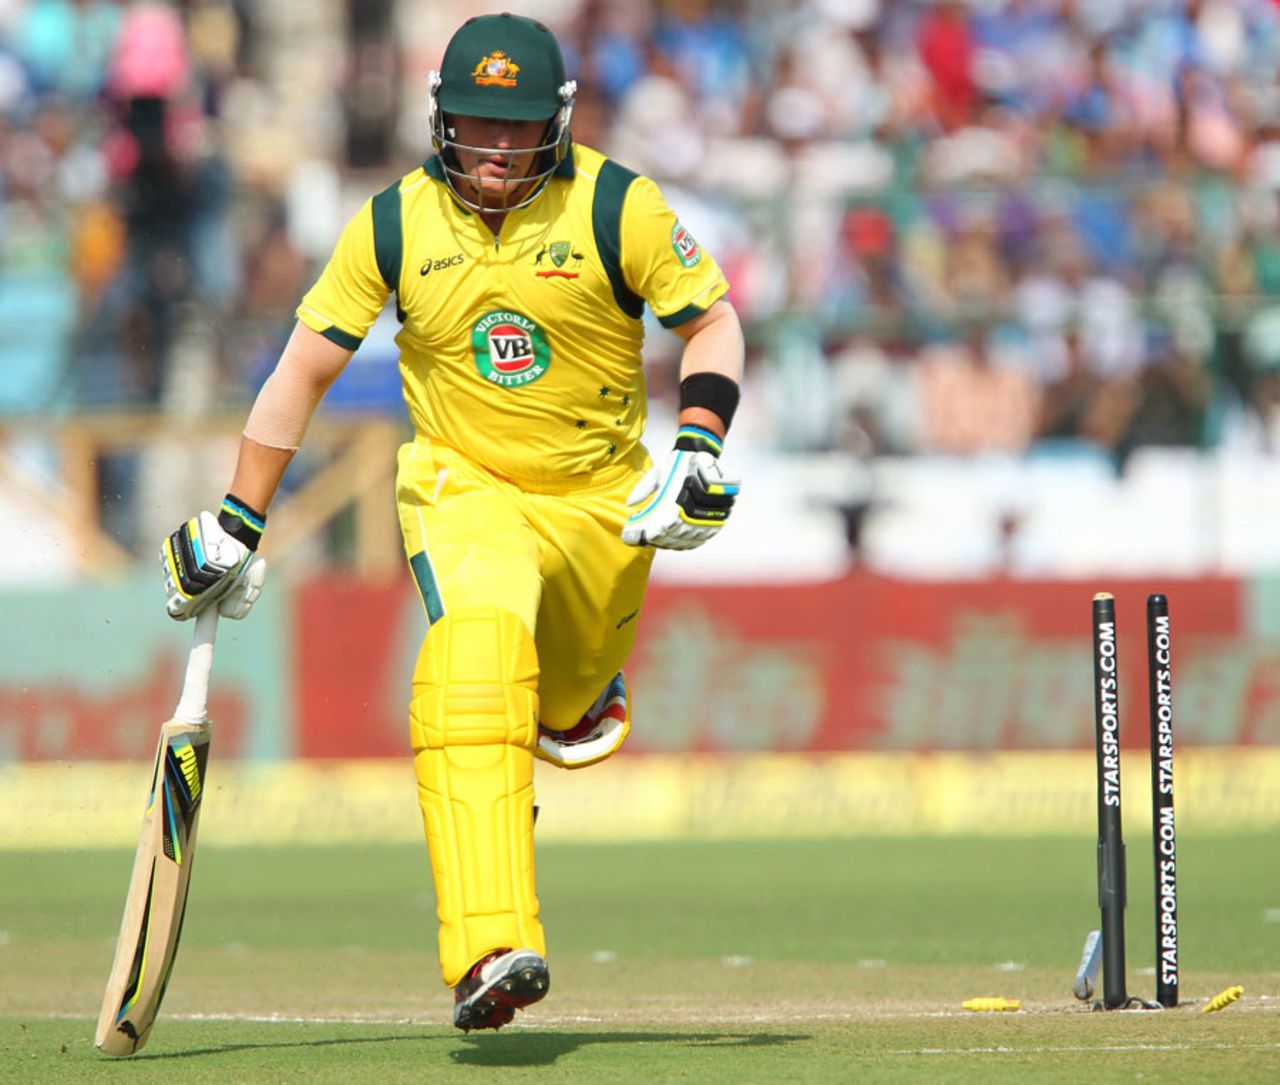 Aaron Finch after being run out by Suresh Raina, India v Australia, 2nd ODI, Jaipur, October 16, 2013